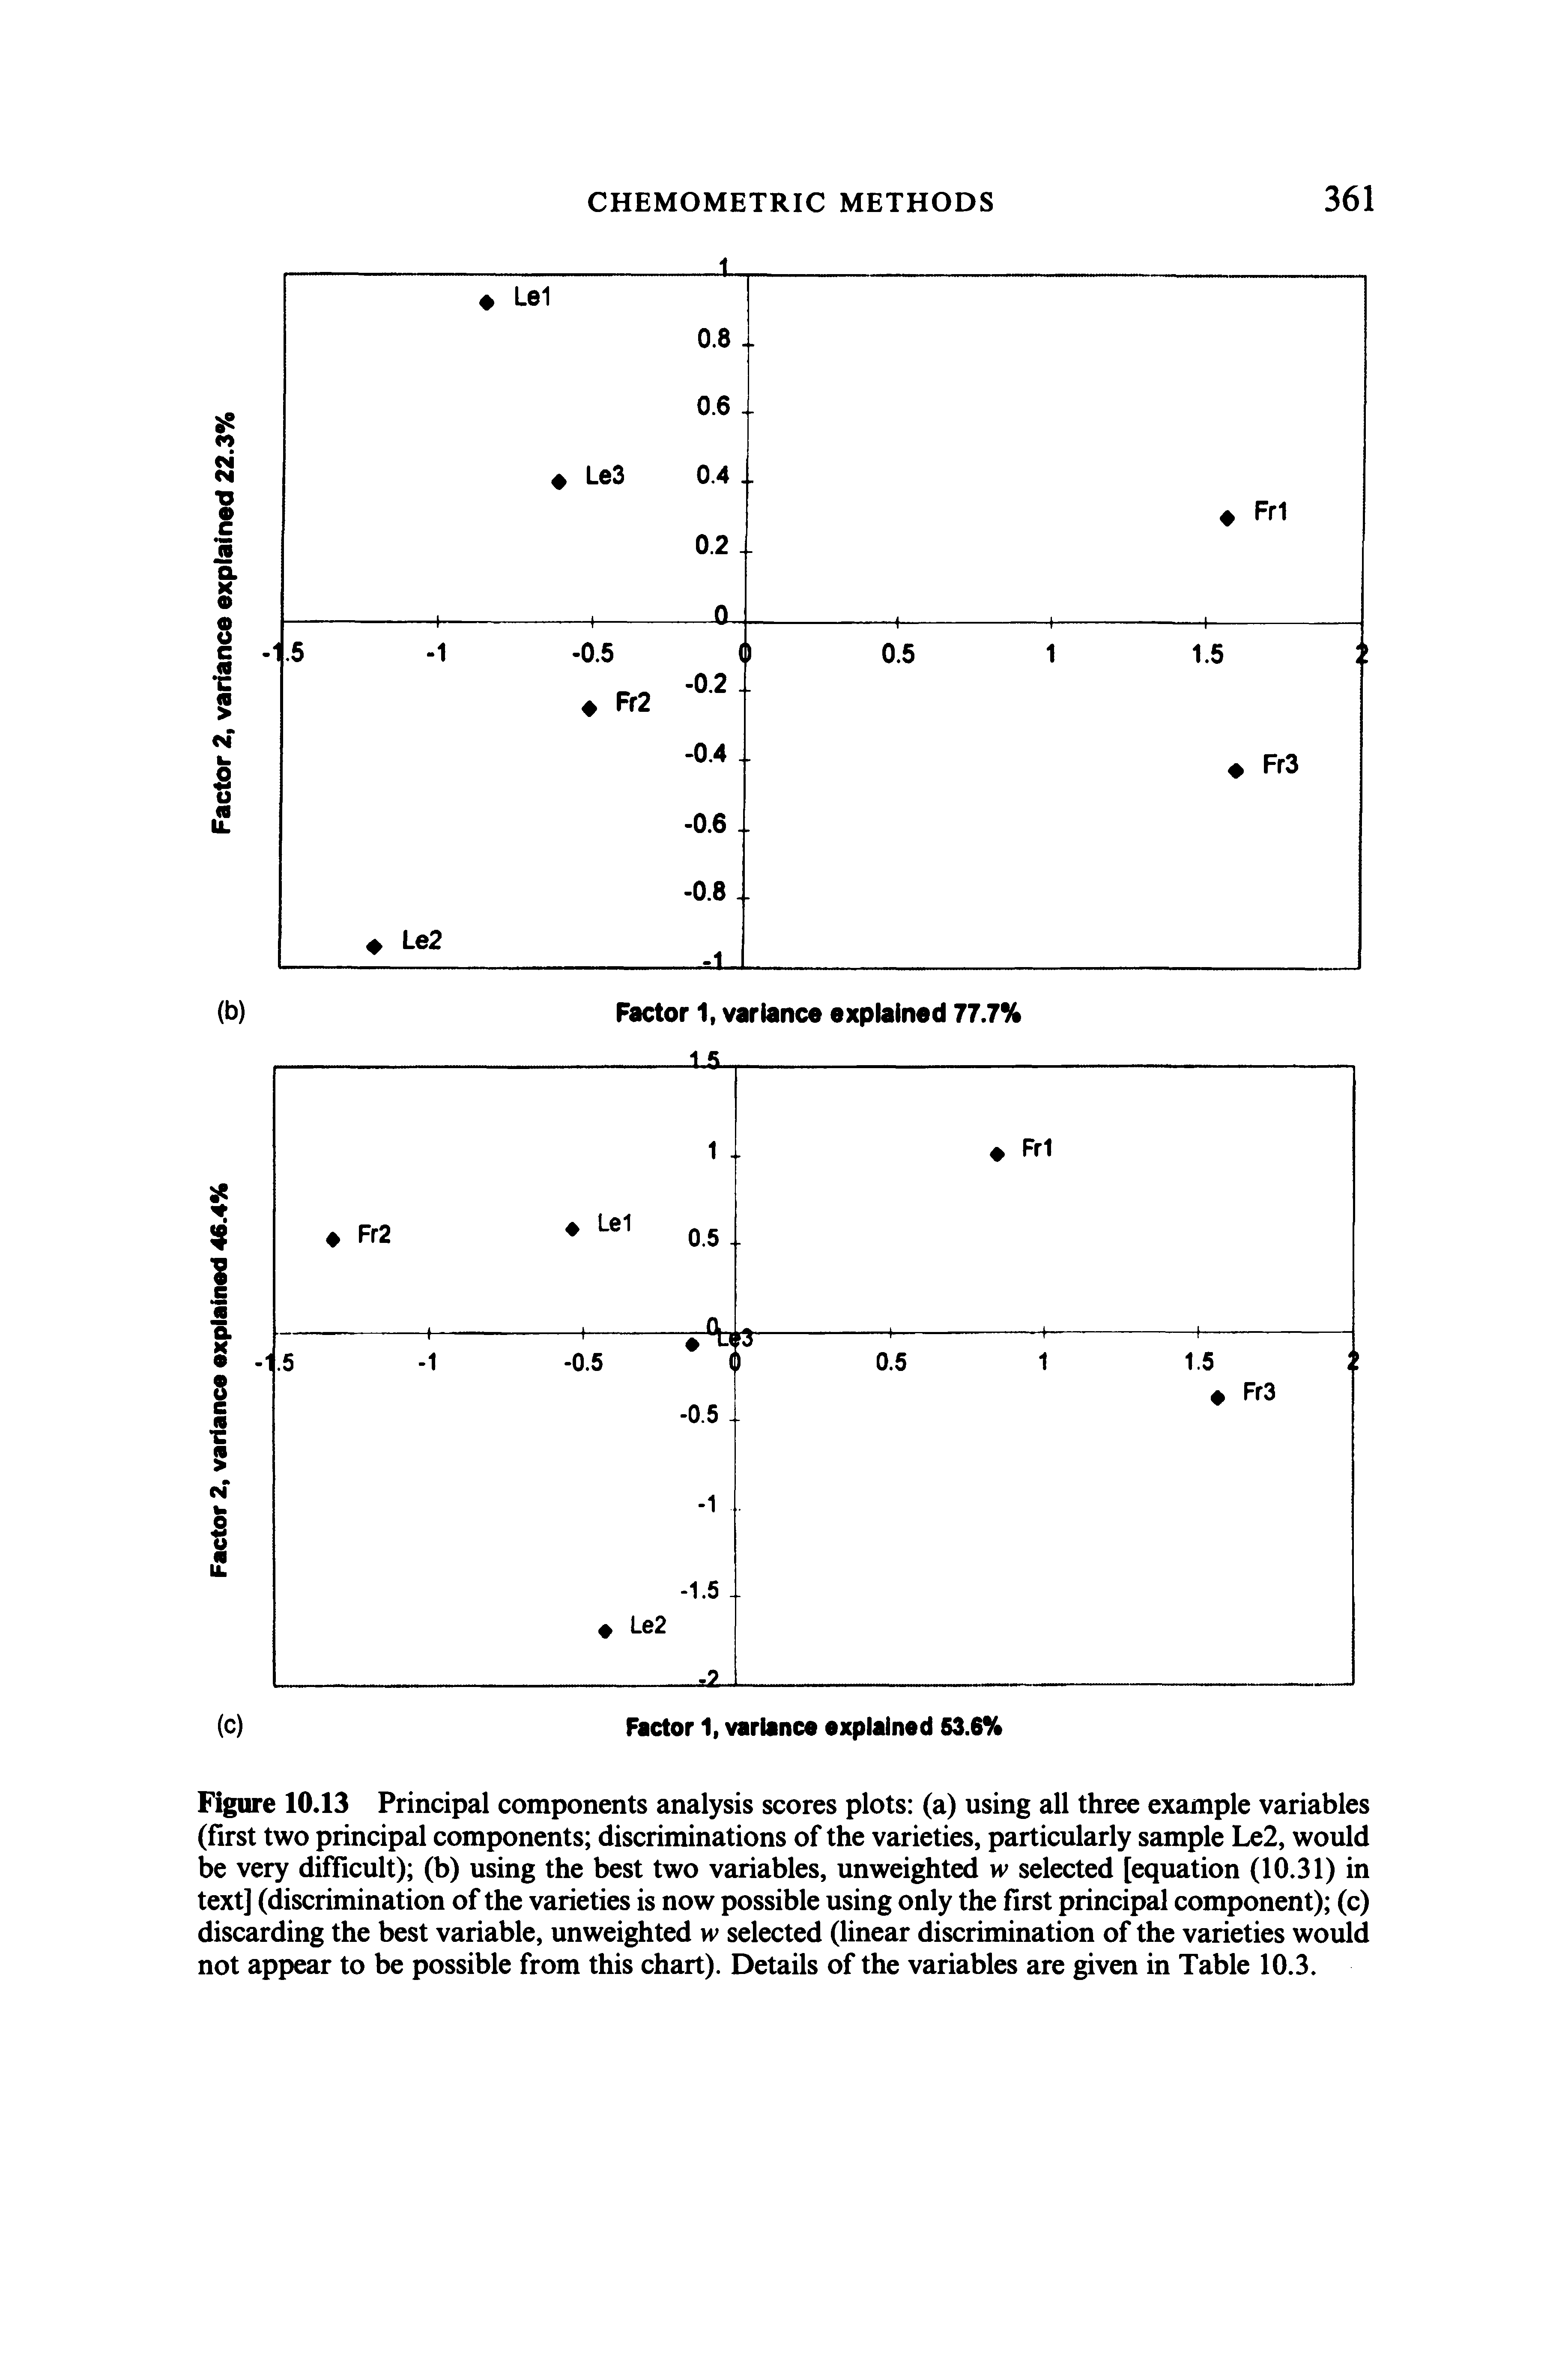 Figure 10.13 Principal components analysis scores plots (a) using all three example variables (first two principal components discriminations of the varieties, particularly sample Le2, would be very difficult) (b) using the best two variables, unweighted w selected [equation (10.31) in text] (discrimination of the varieties is now possible using only the first principal component) (c) discarding the best variable, unweighted w selected (linear discrimination of the varieties would not appear to be possible from this chart). Details of the variables are given in Table 10.3.